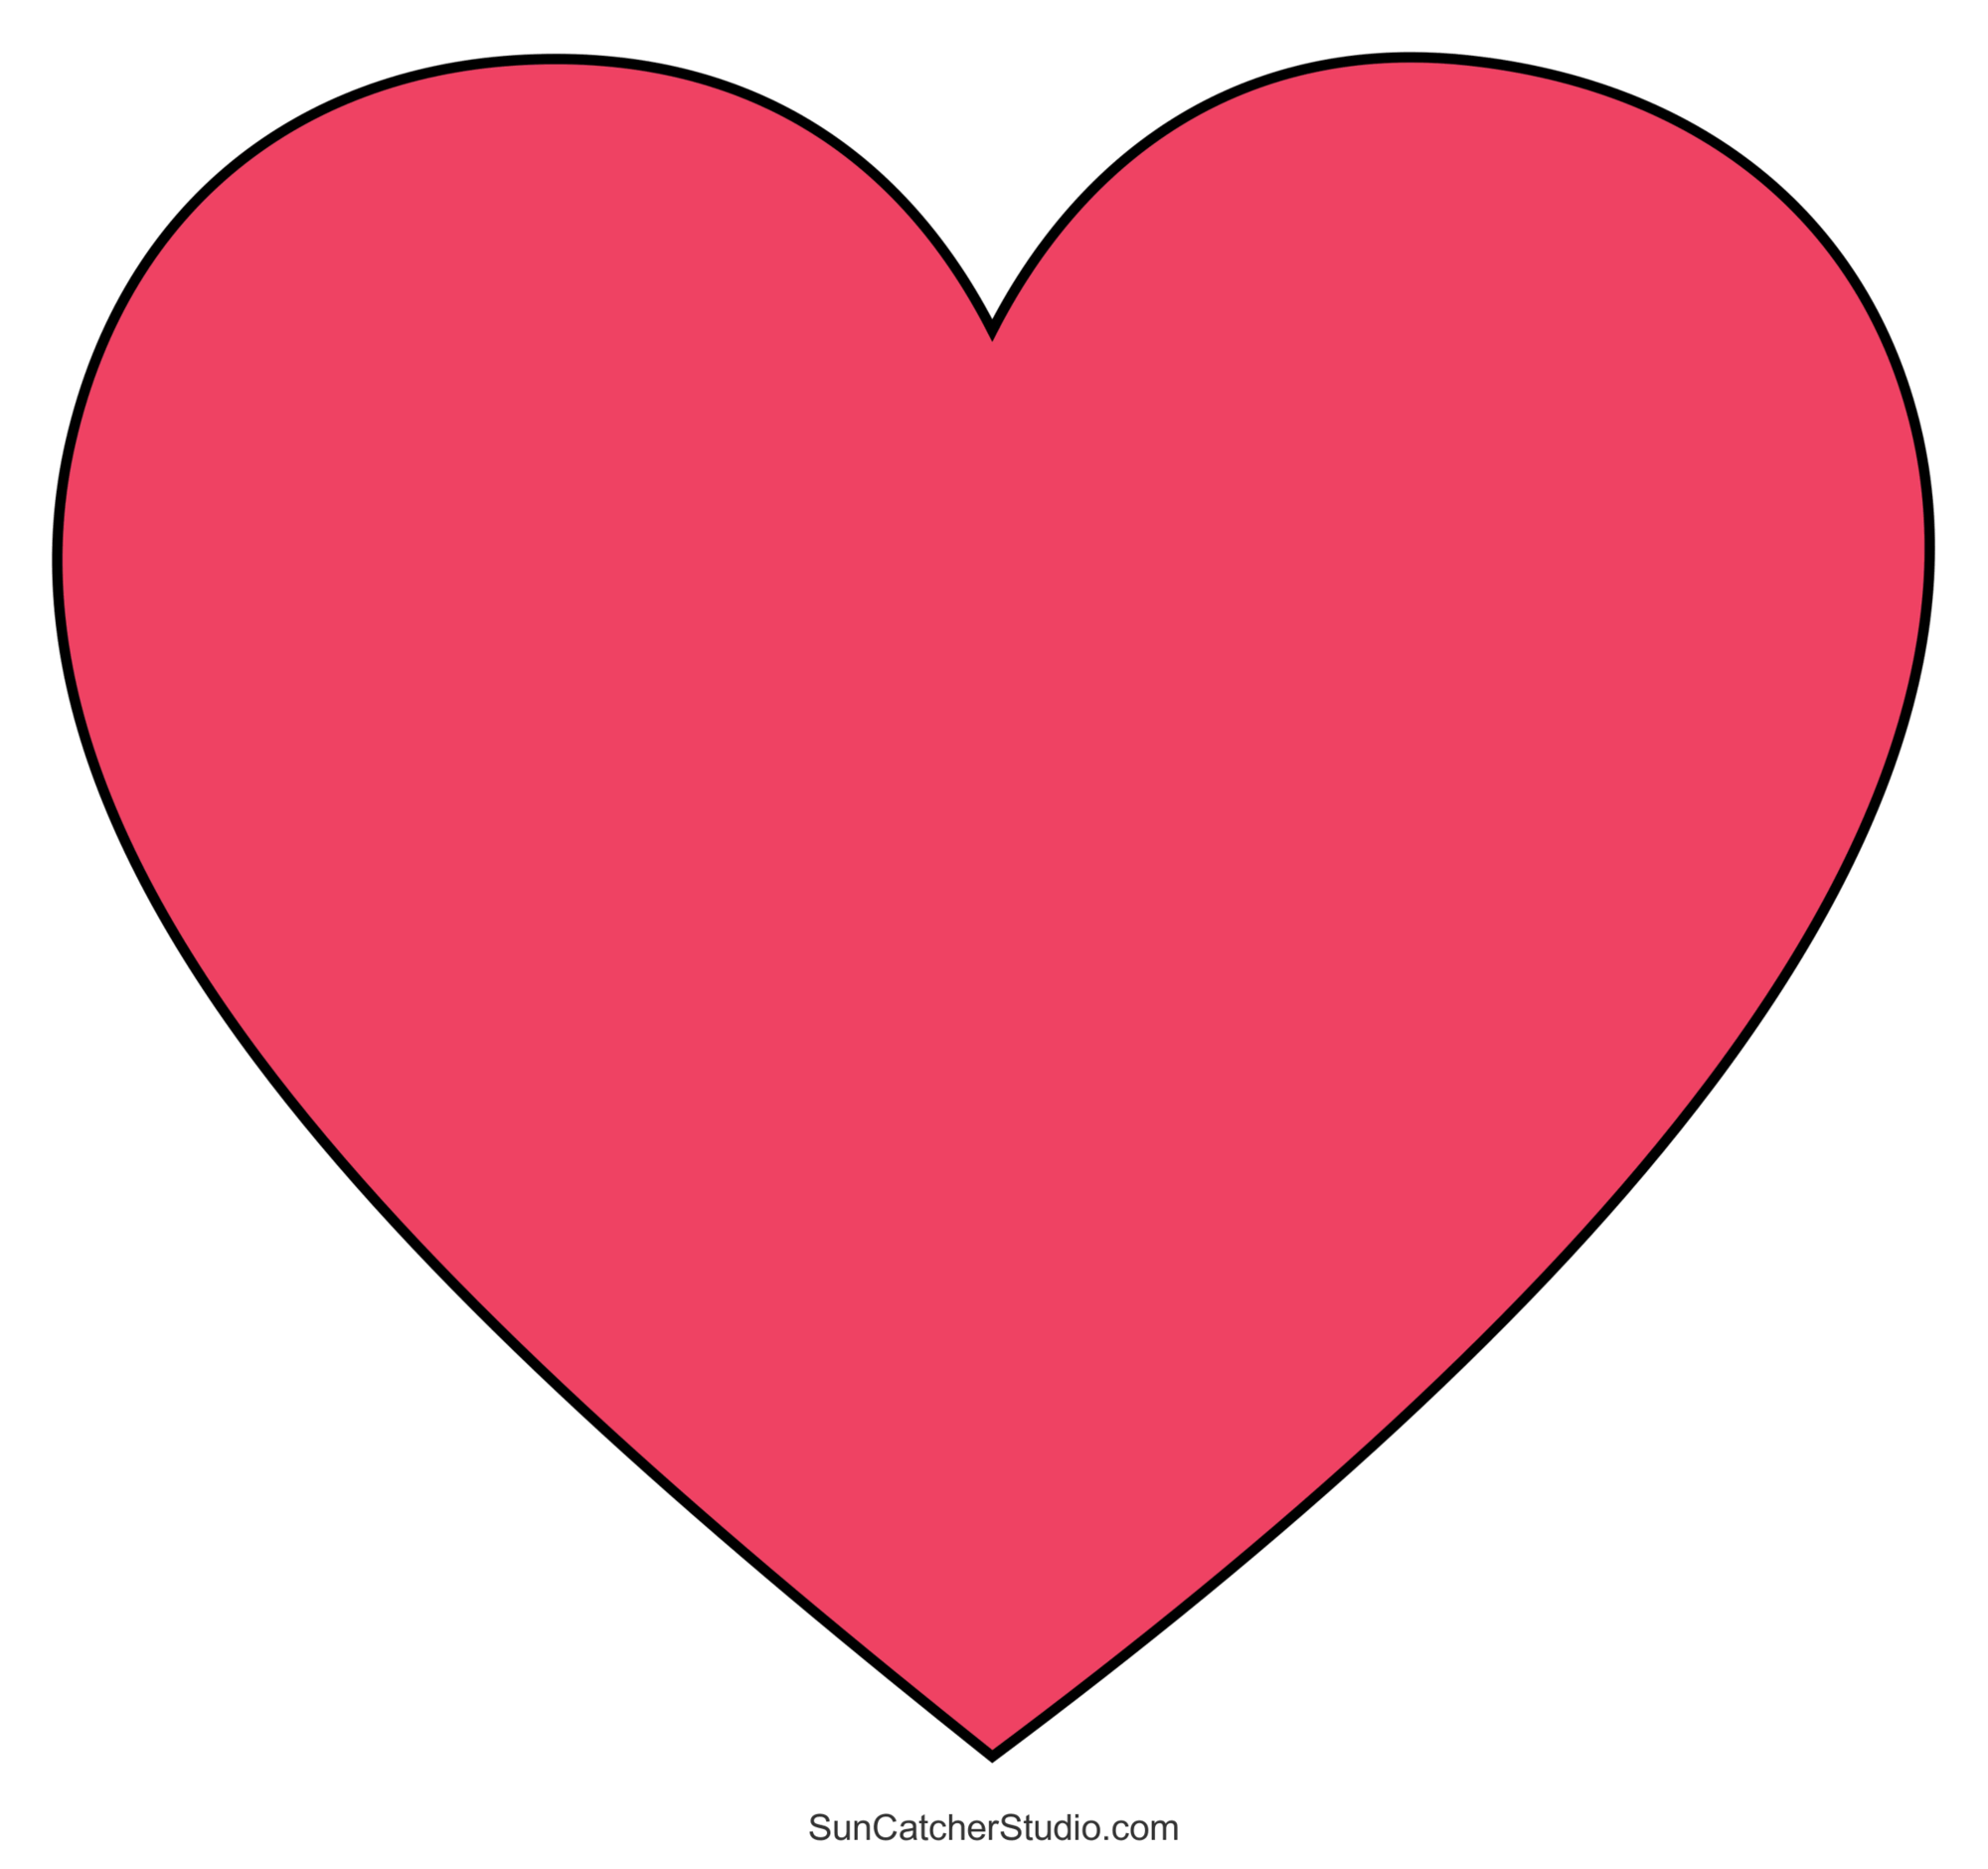 Heart Patterns (Free Printable Valentines Day Clip Art) – DIY Projects,  Patterns, Monograms, Designs, Templates